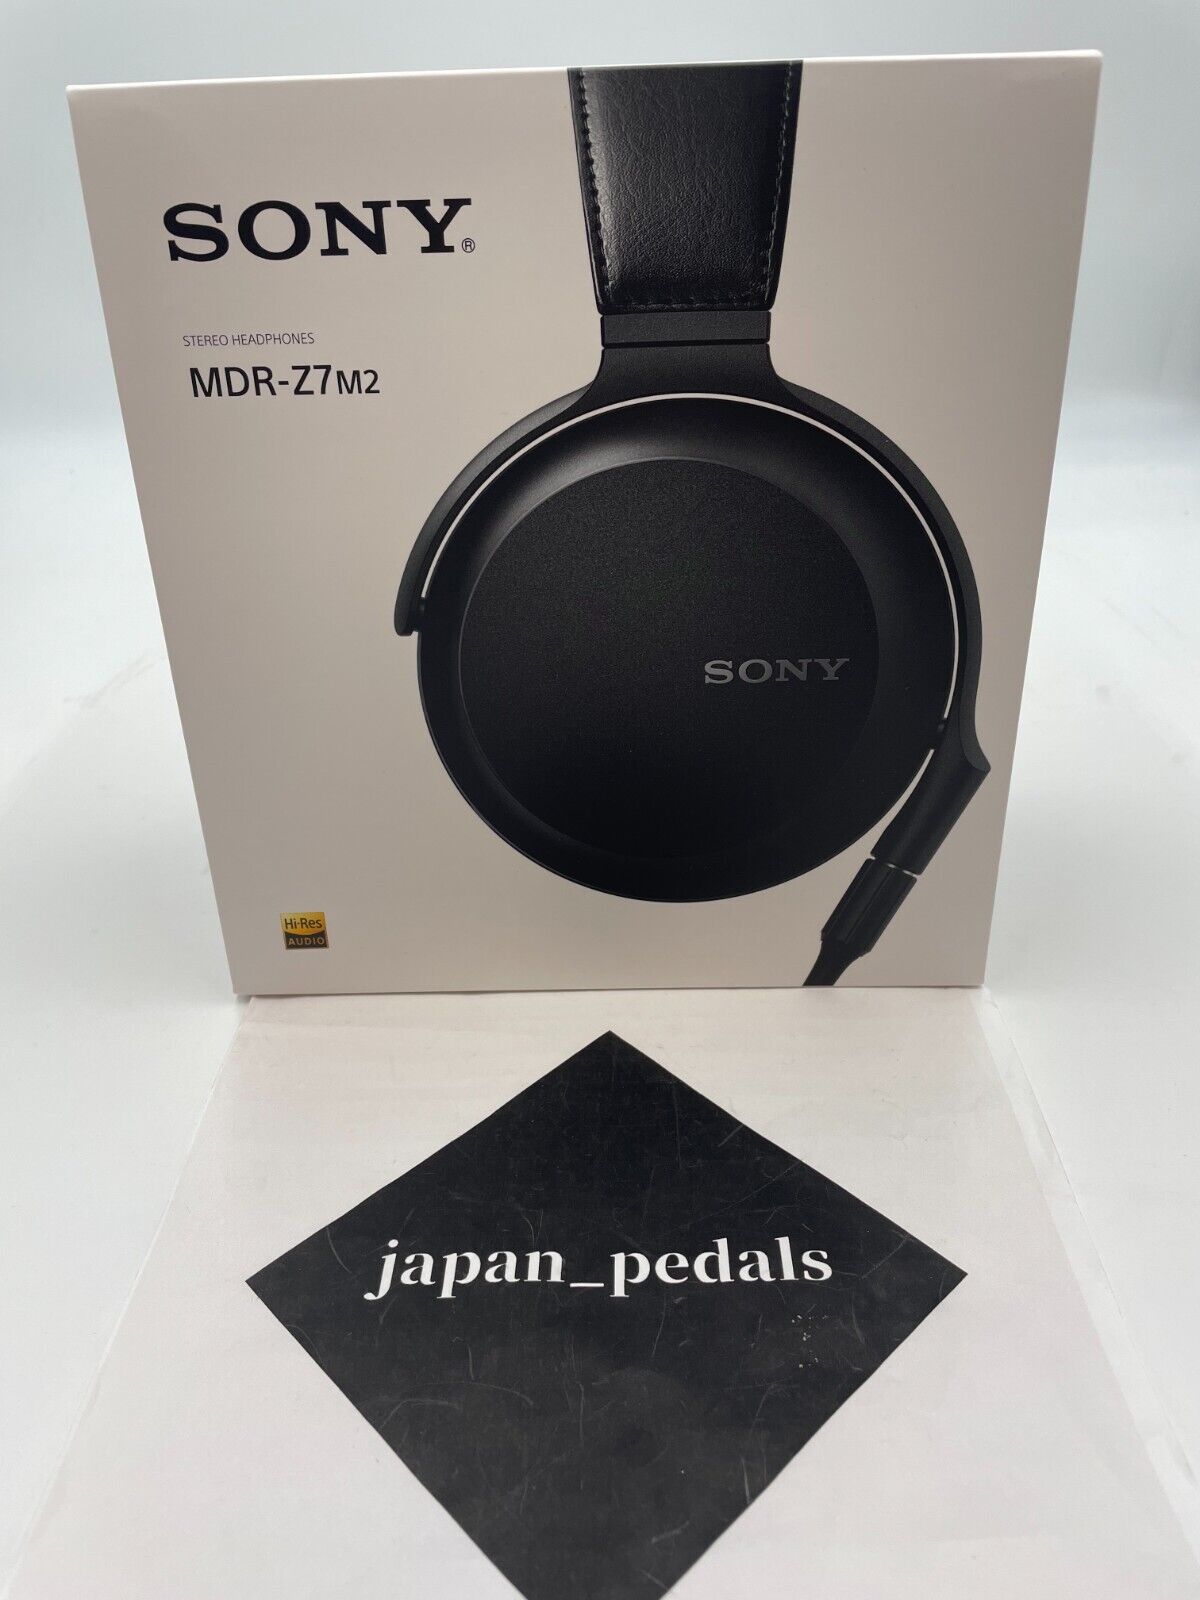 SONY MDR-Z7 M2 stereo headphone balance connection correspondence